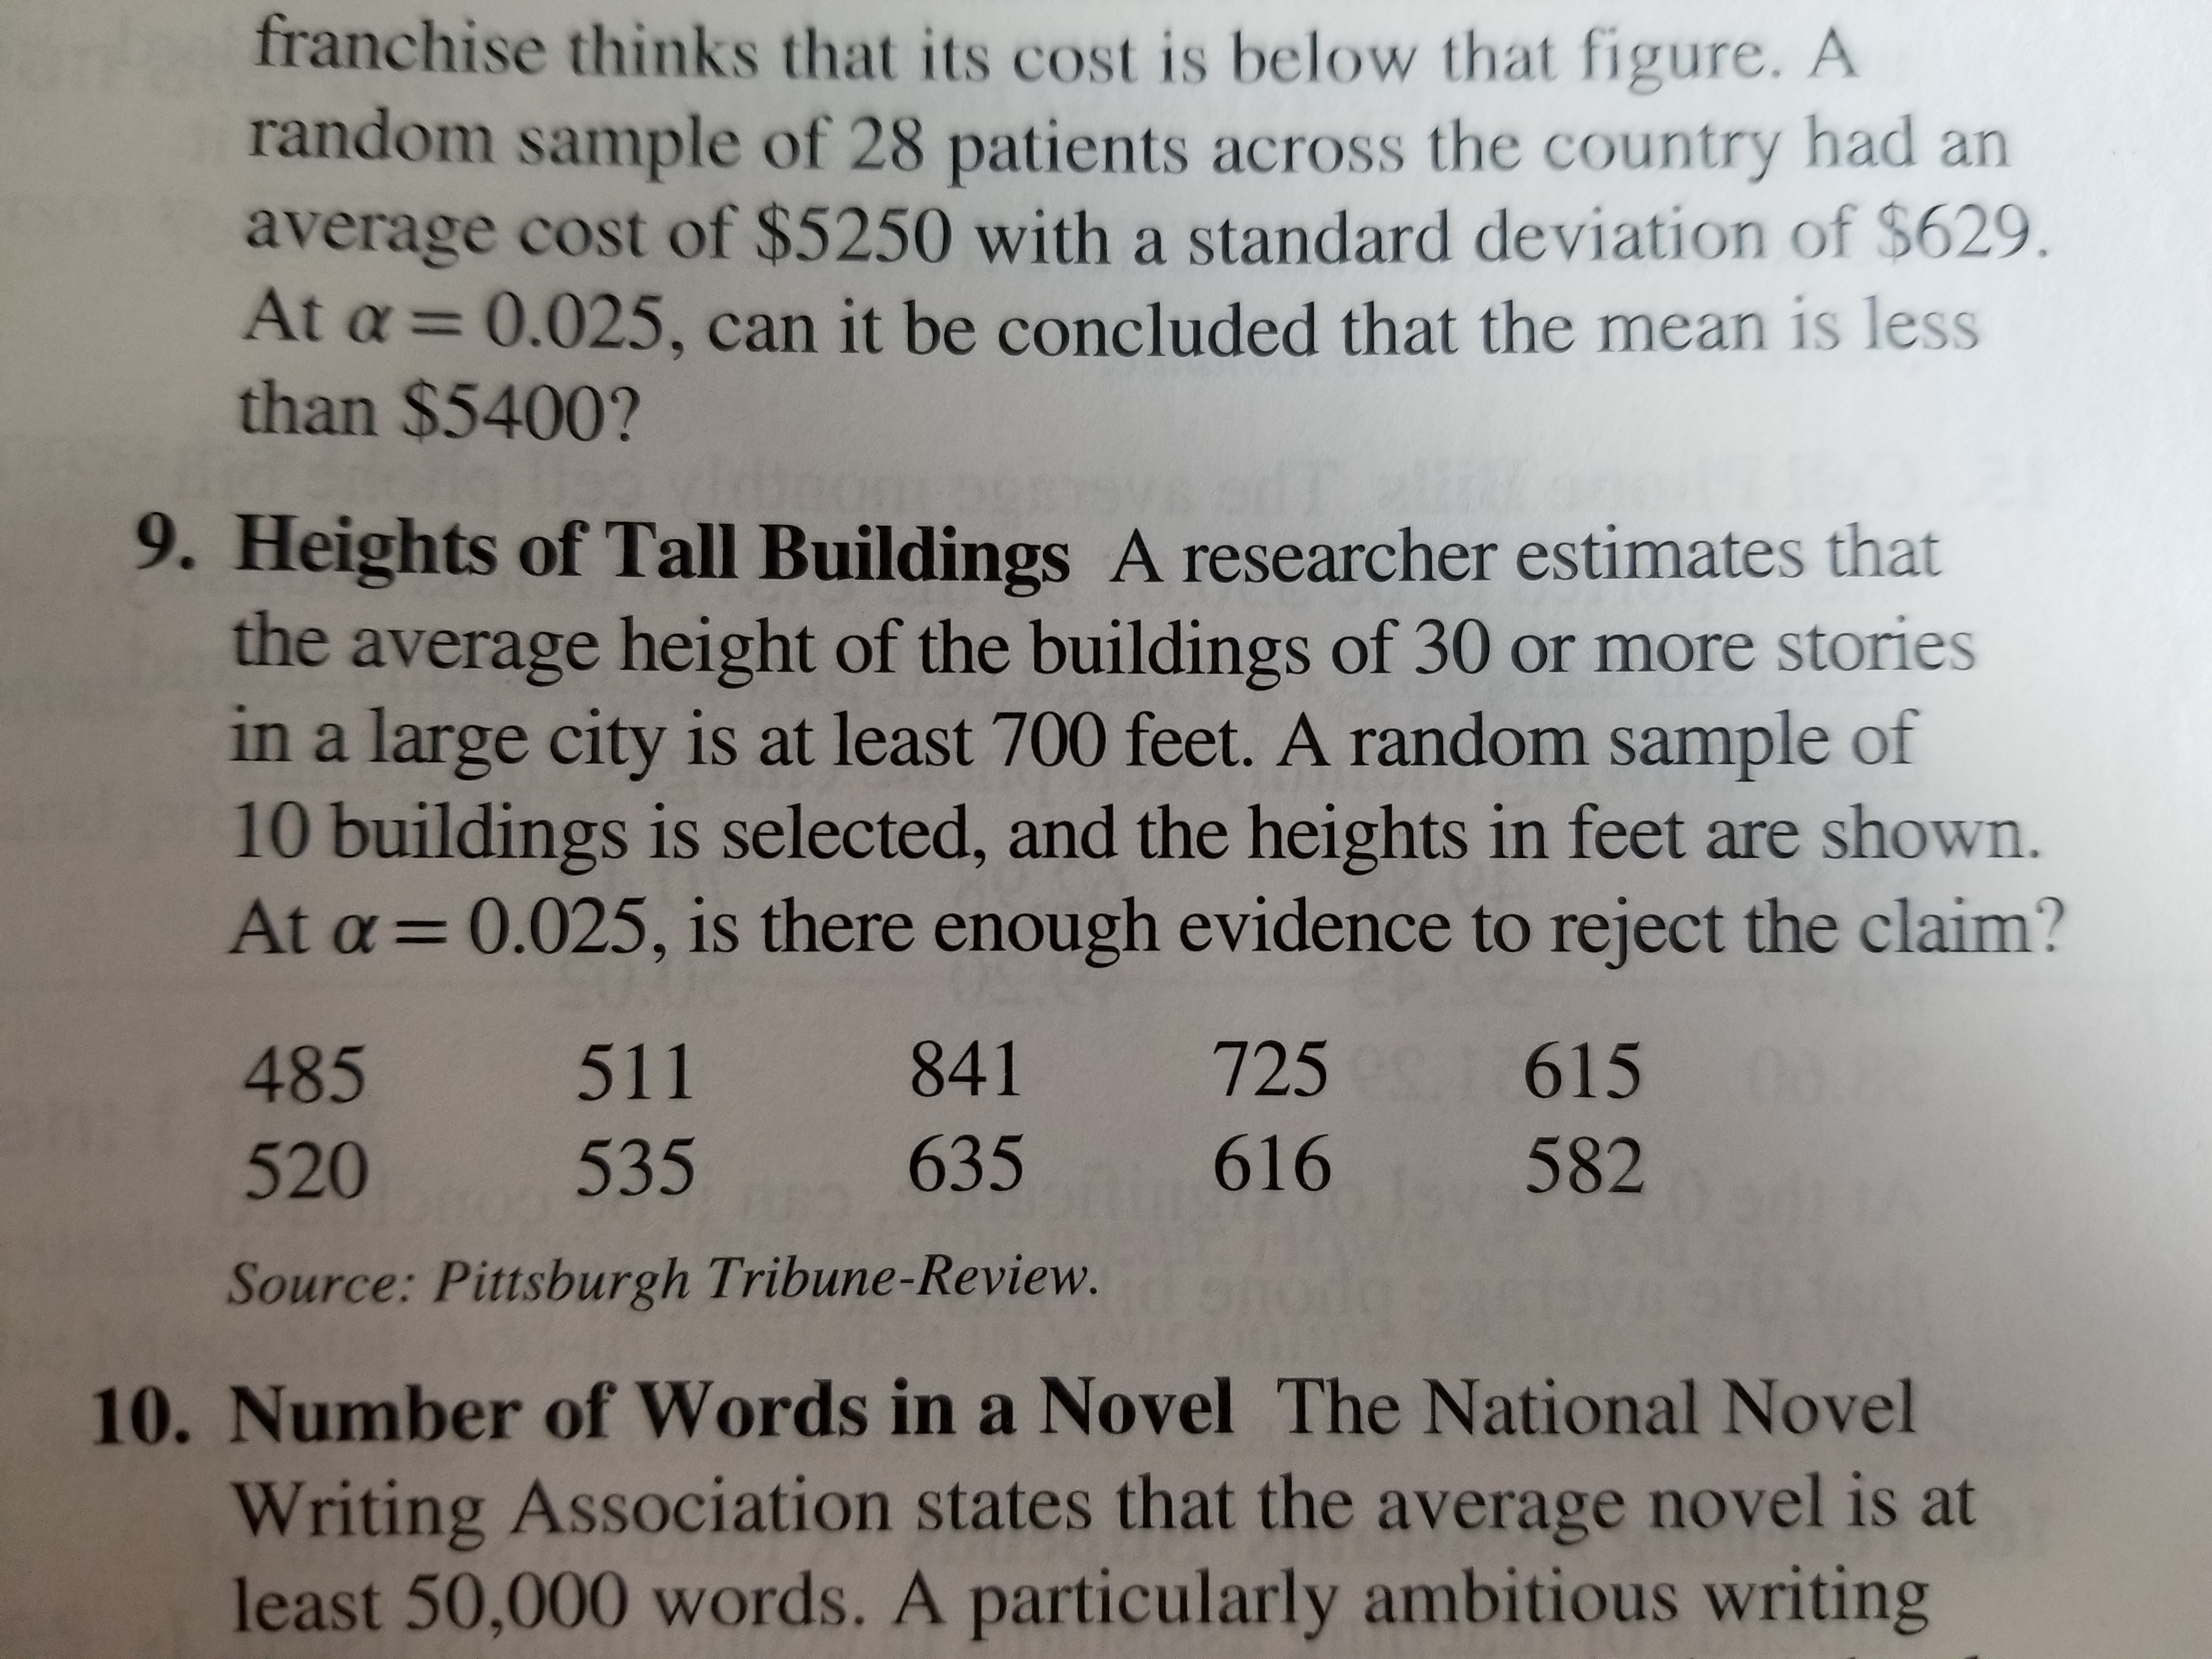 franchise thinks that its cost is below that figure. A
random sample of 28 patients across the country had an
average cost of $5250 with a standard deviation of $629
At a 0.025, can it be concluded that the mean is less
than $5400?
9. Heights of Tall Buildings A researcher estimates that
the average height of the buildings of 30 or more stories
in a large city is at least 700 feet. A random sample of
10 buildings is selected, and the heights in feet are shown.
At a 0.025, is there enough evidence to reject the claim?
485
511
841
725
615
520
535
635
616
582
Source: Pittsburgh Tribune-Review.
10. Number of Words ina Novel The National Novel
Writing Association states that the average novel is at
least 50,000 words. A particularly ambitious writing
